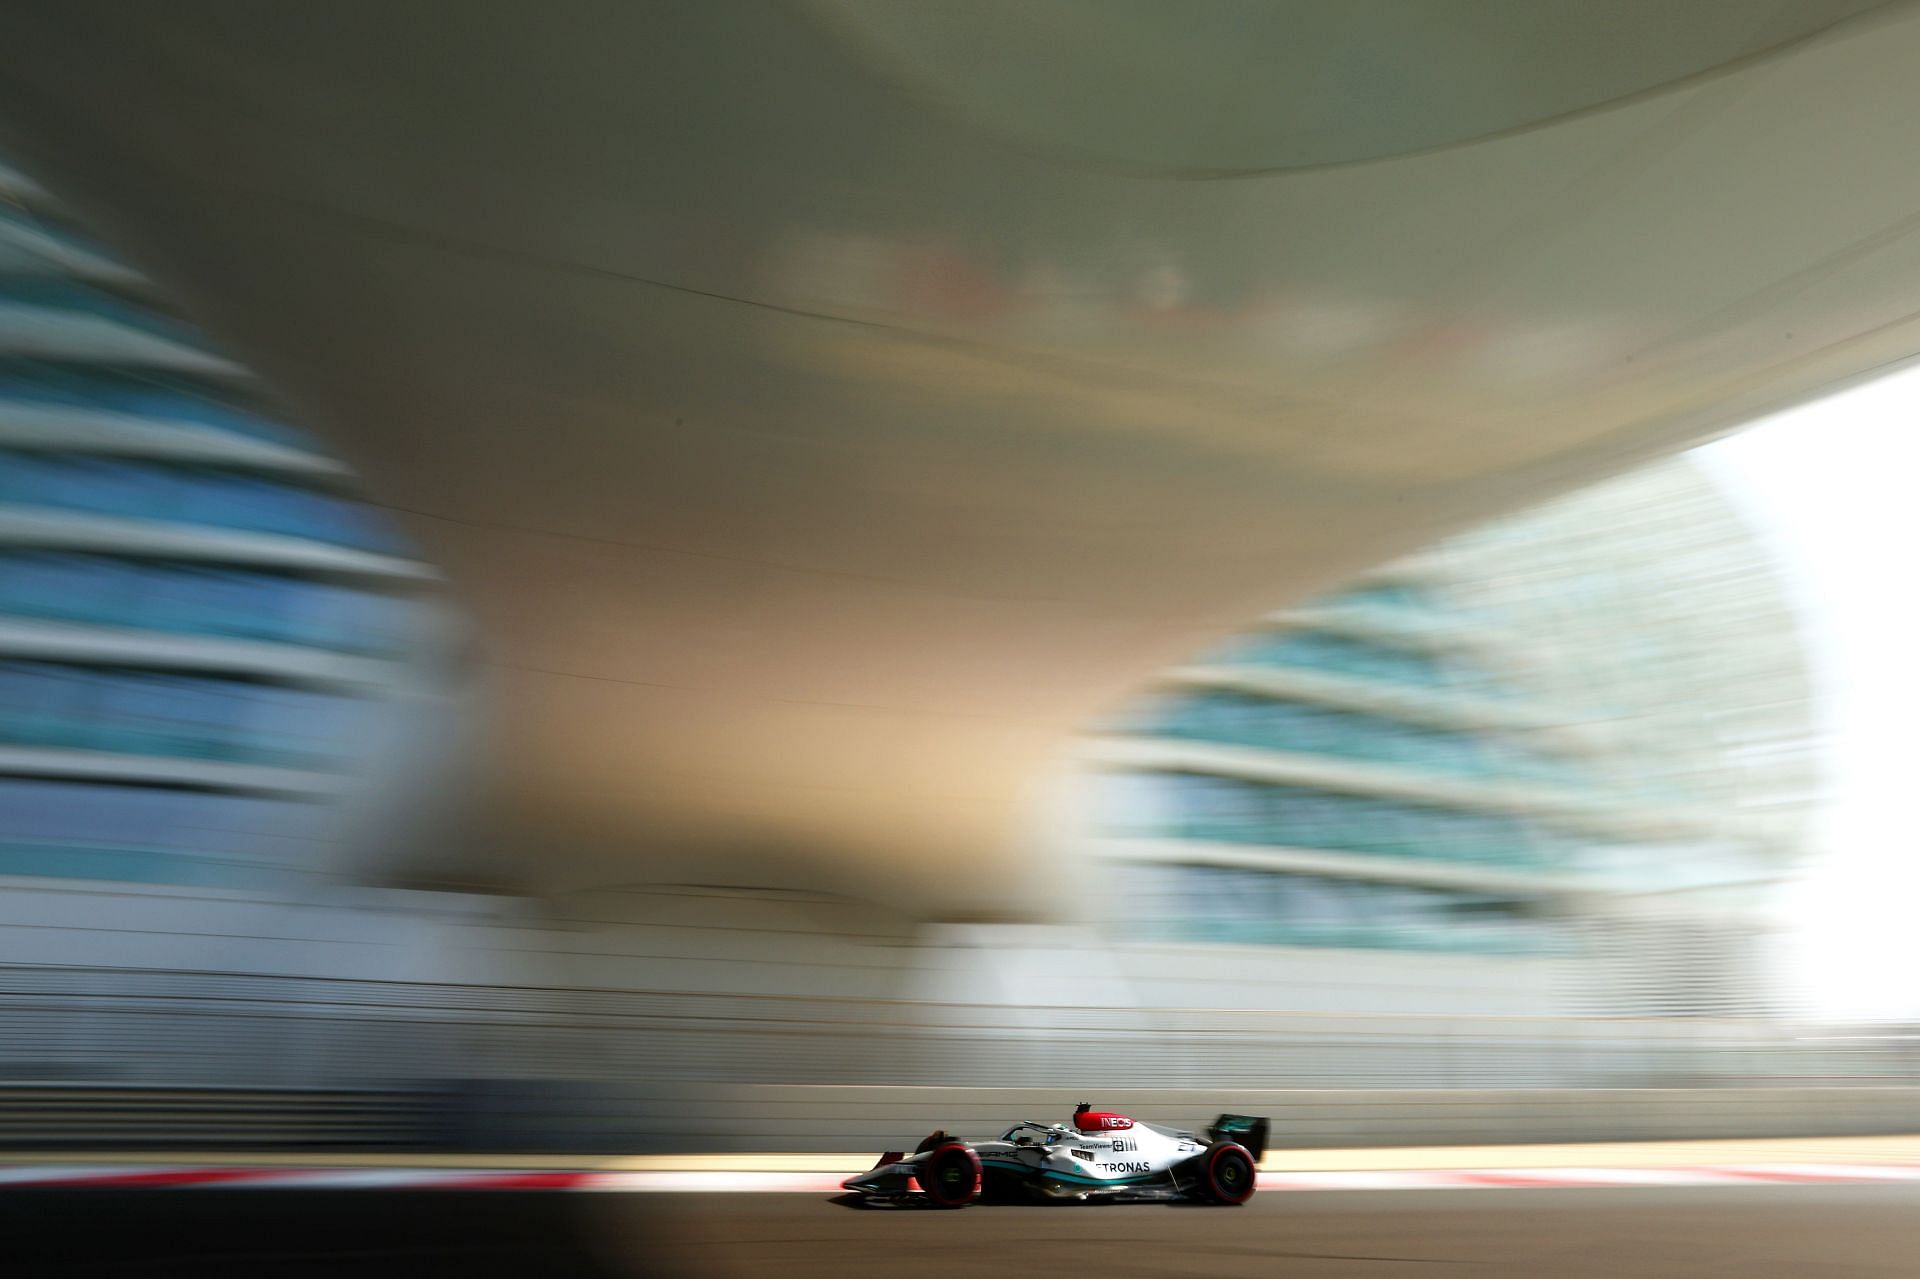 Mercedes F1 W14 makes its track debut at Silverstone